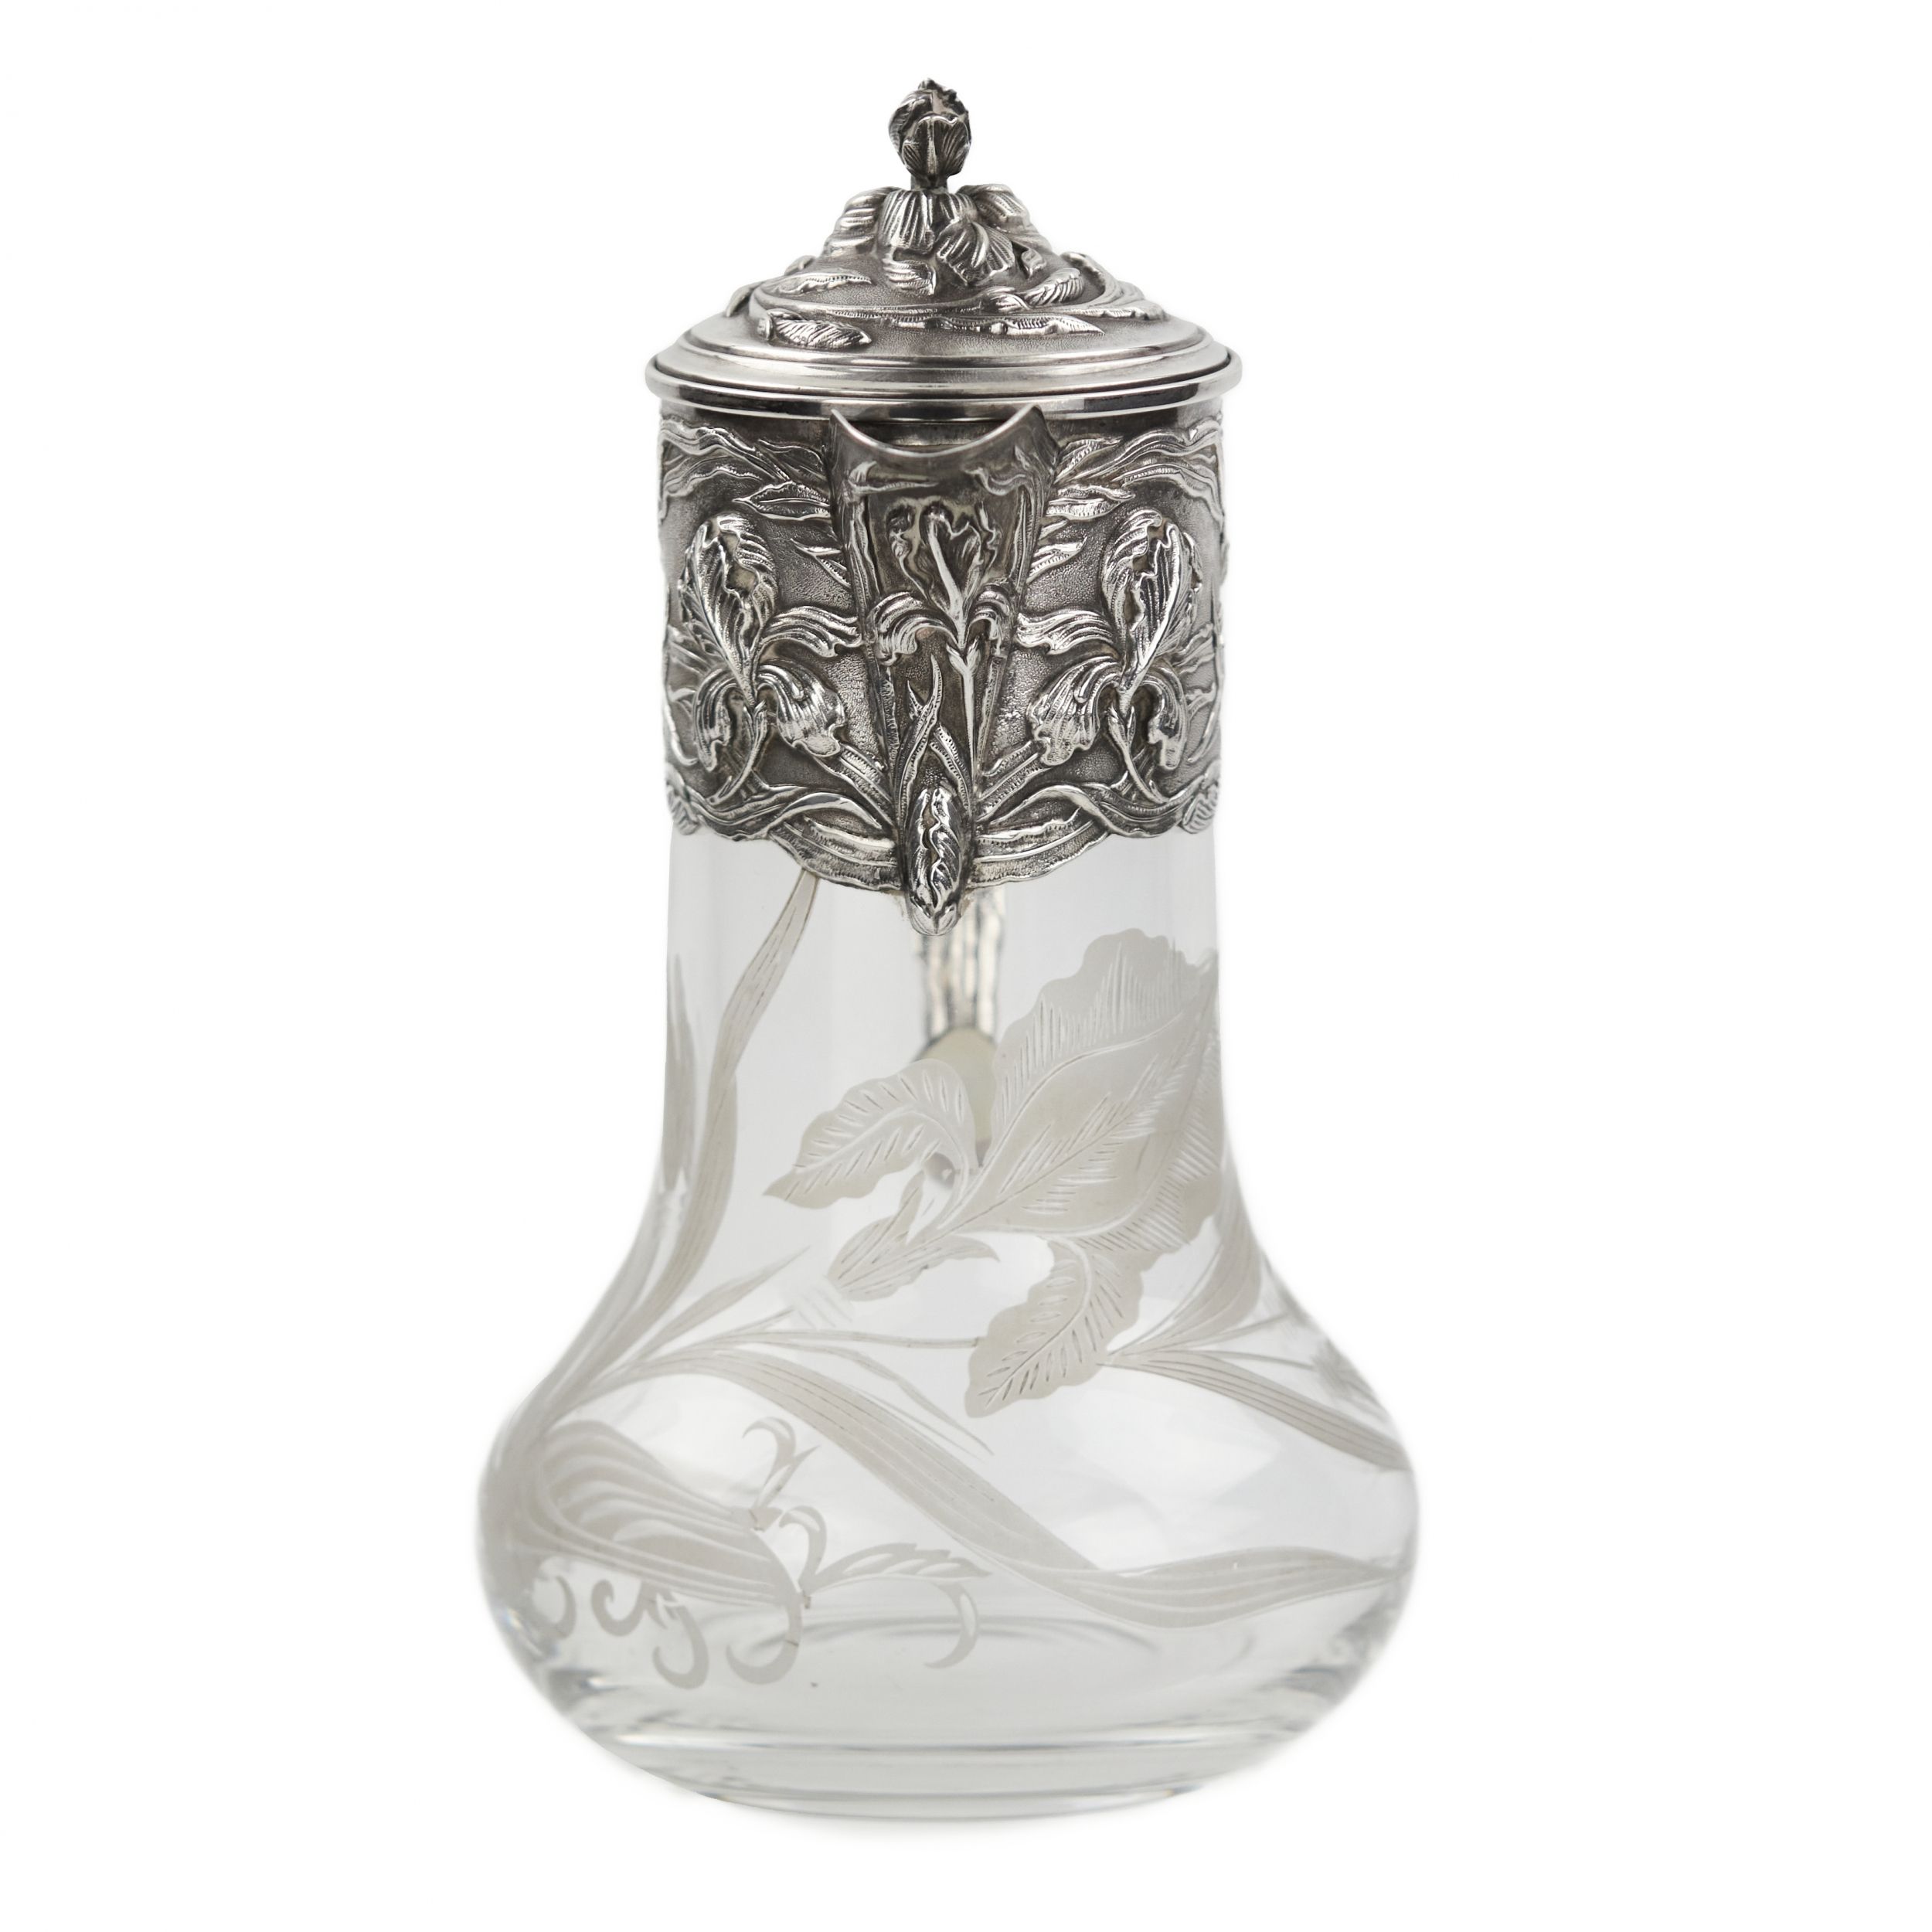 Crystal jug in silver from the Art Nouveau era. - Image 3 of 8